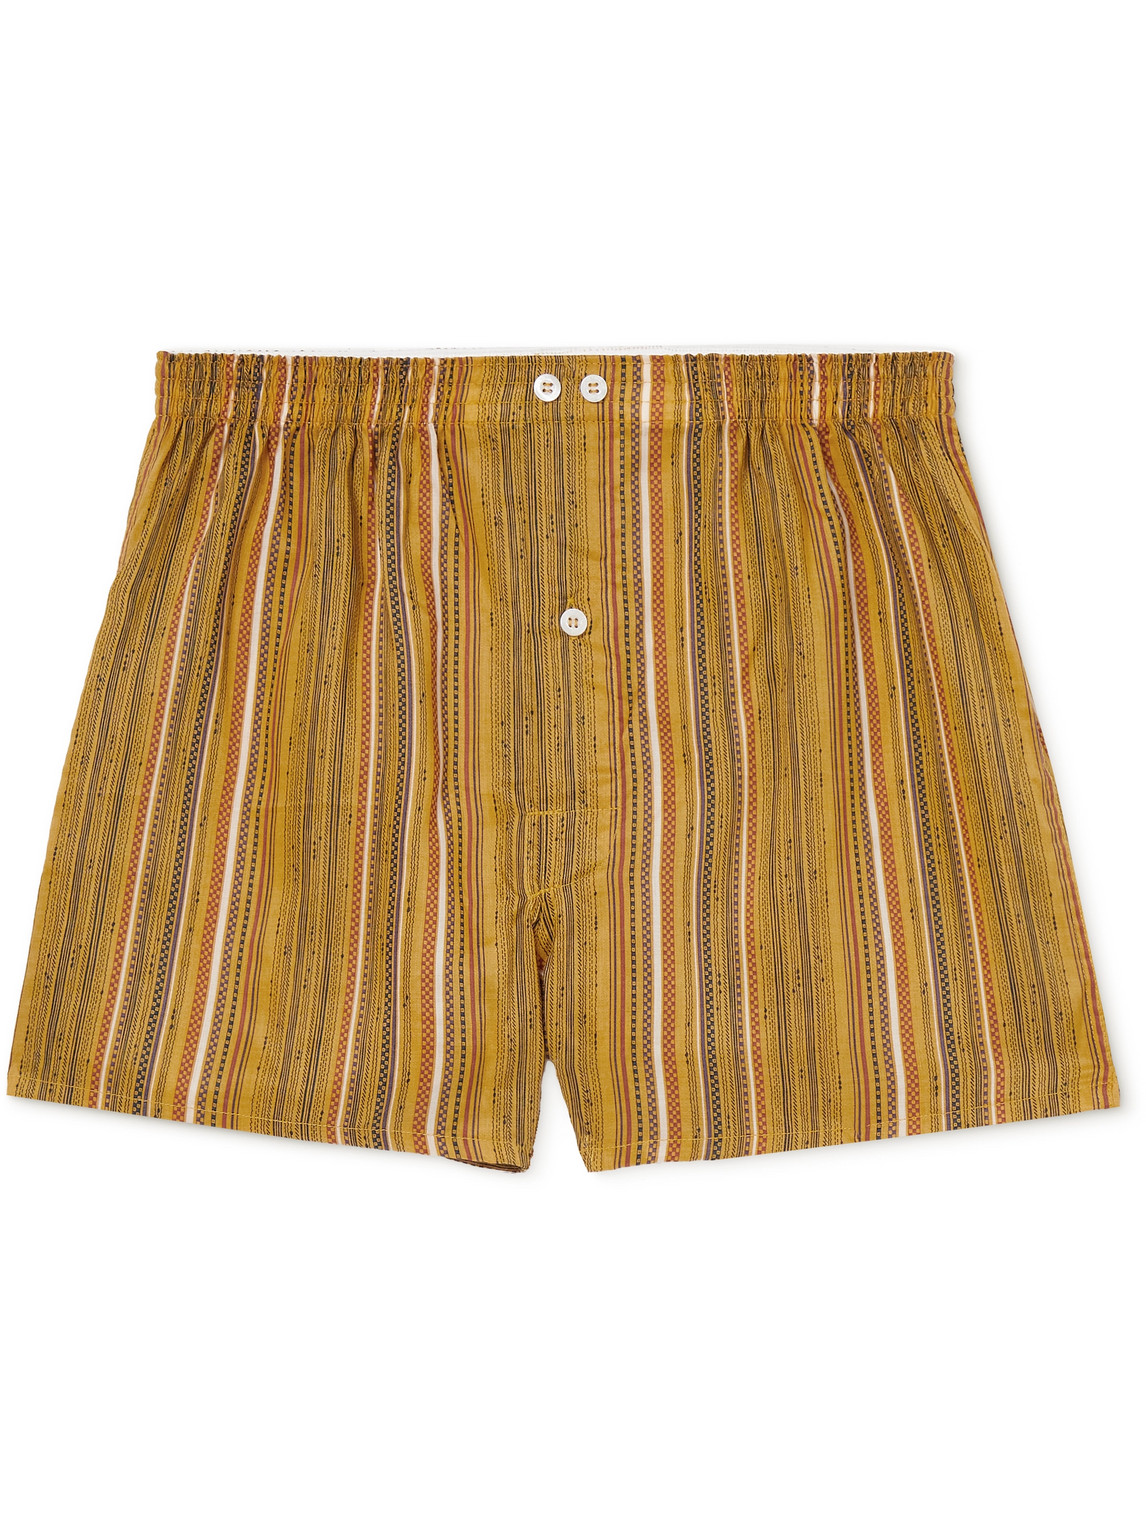 Anonymous Ism Slim-fit Striped Lyocell Boxer Shorts In Yellow